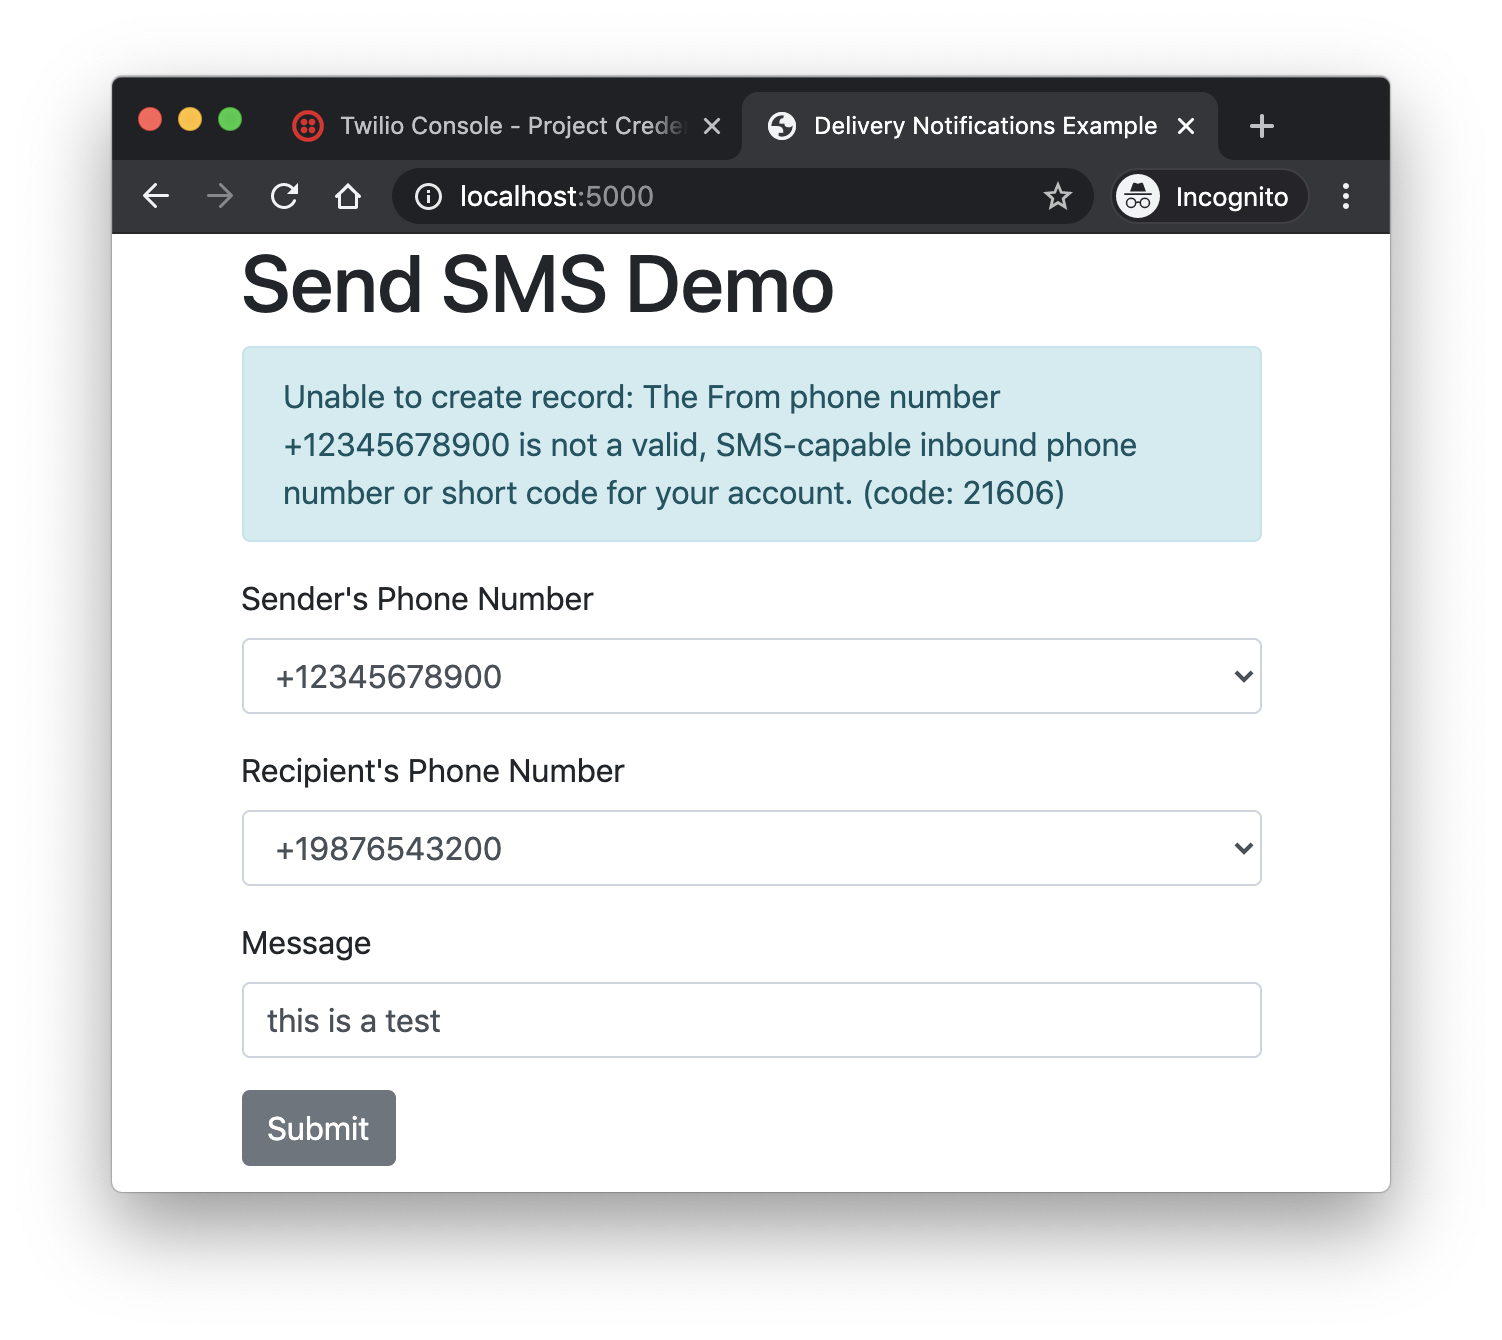 send sms example with error